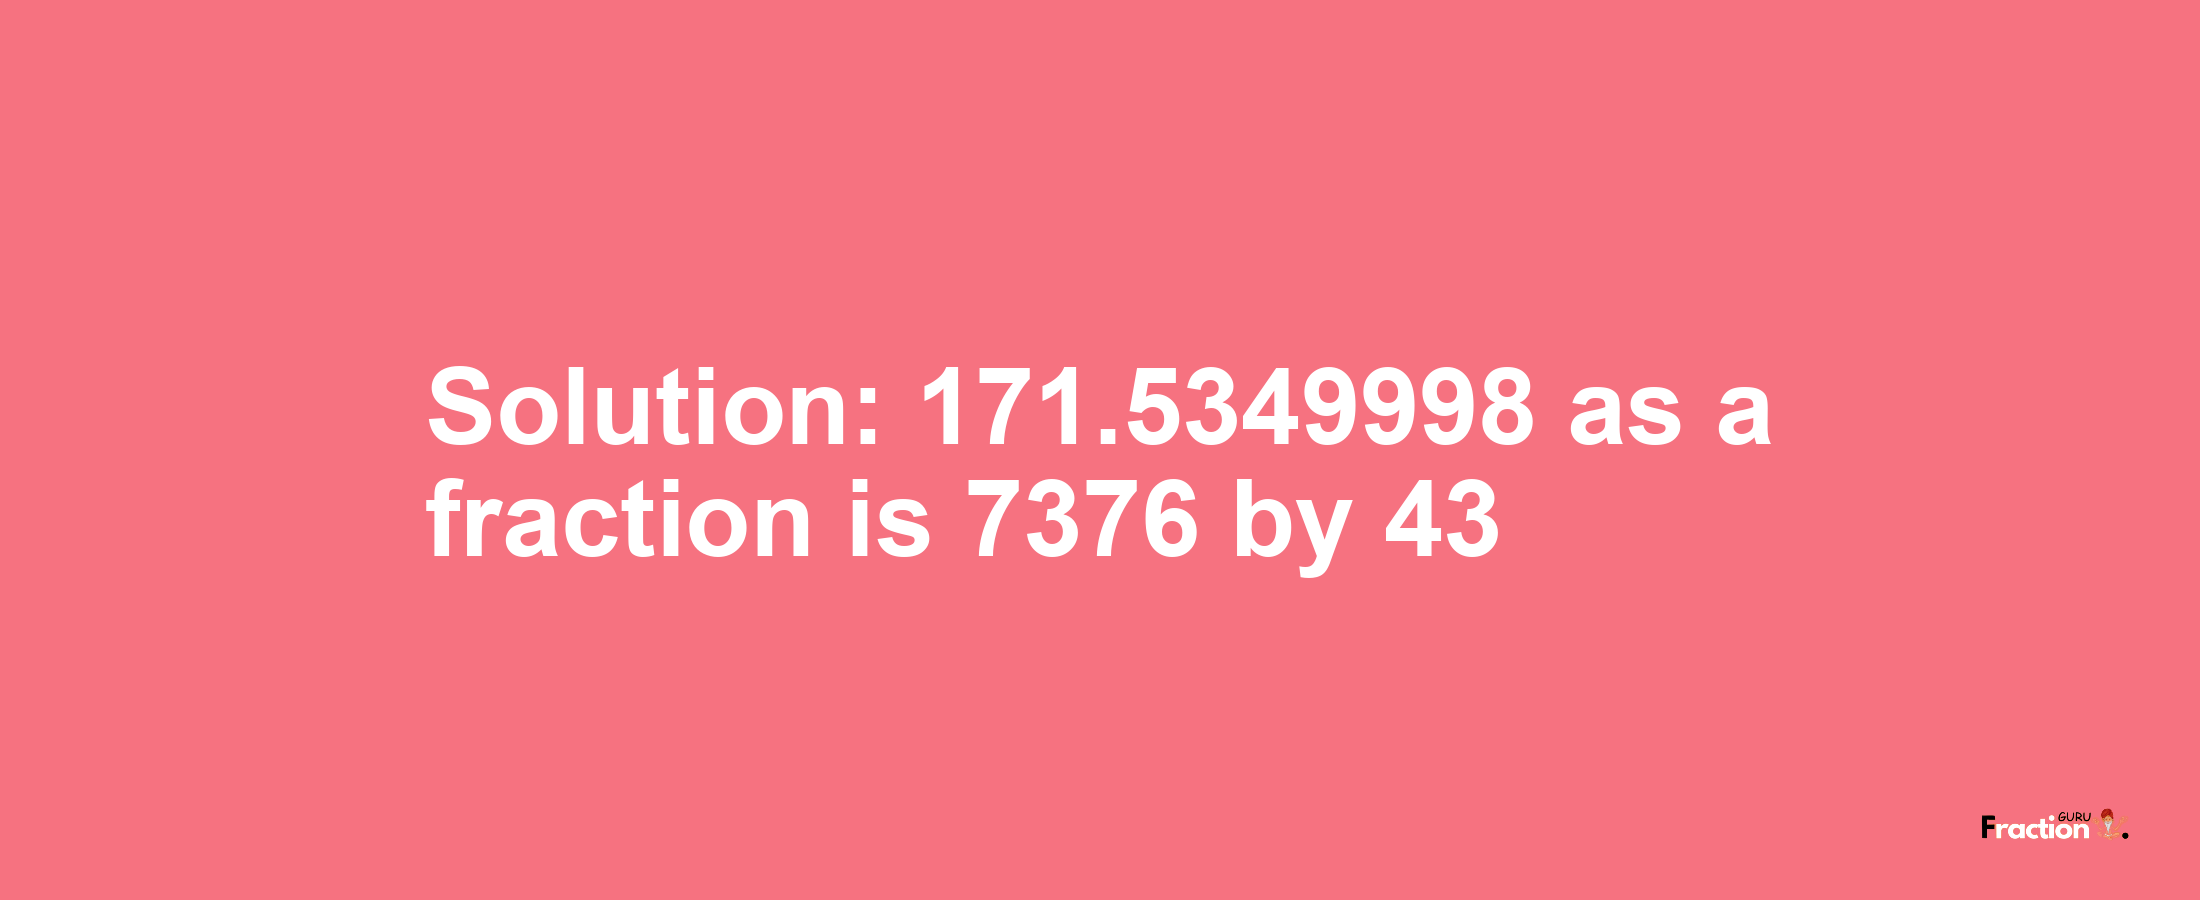 Solution:171.5349998 as a fraction is 7376/43